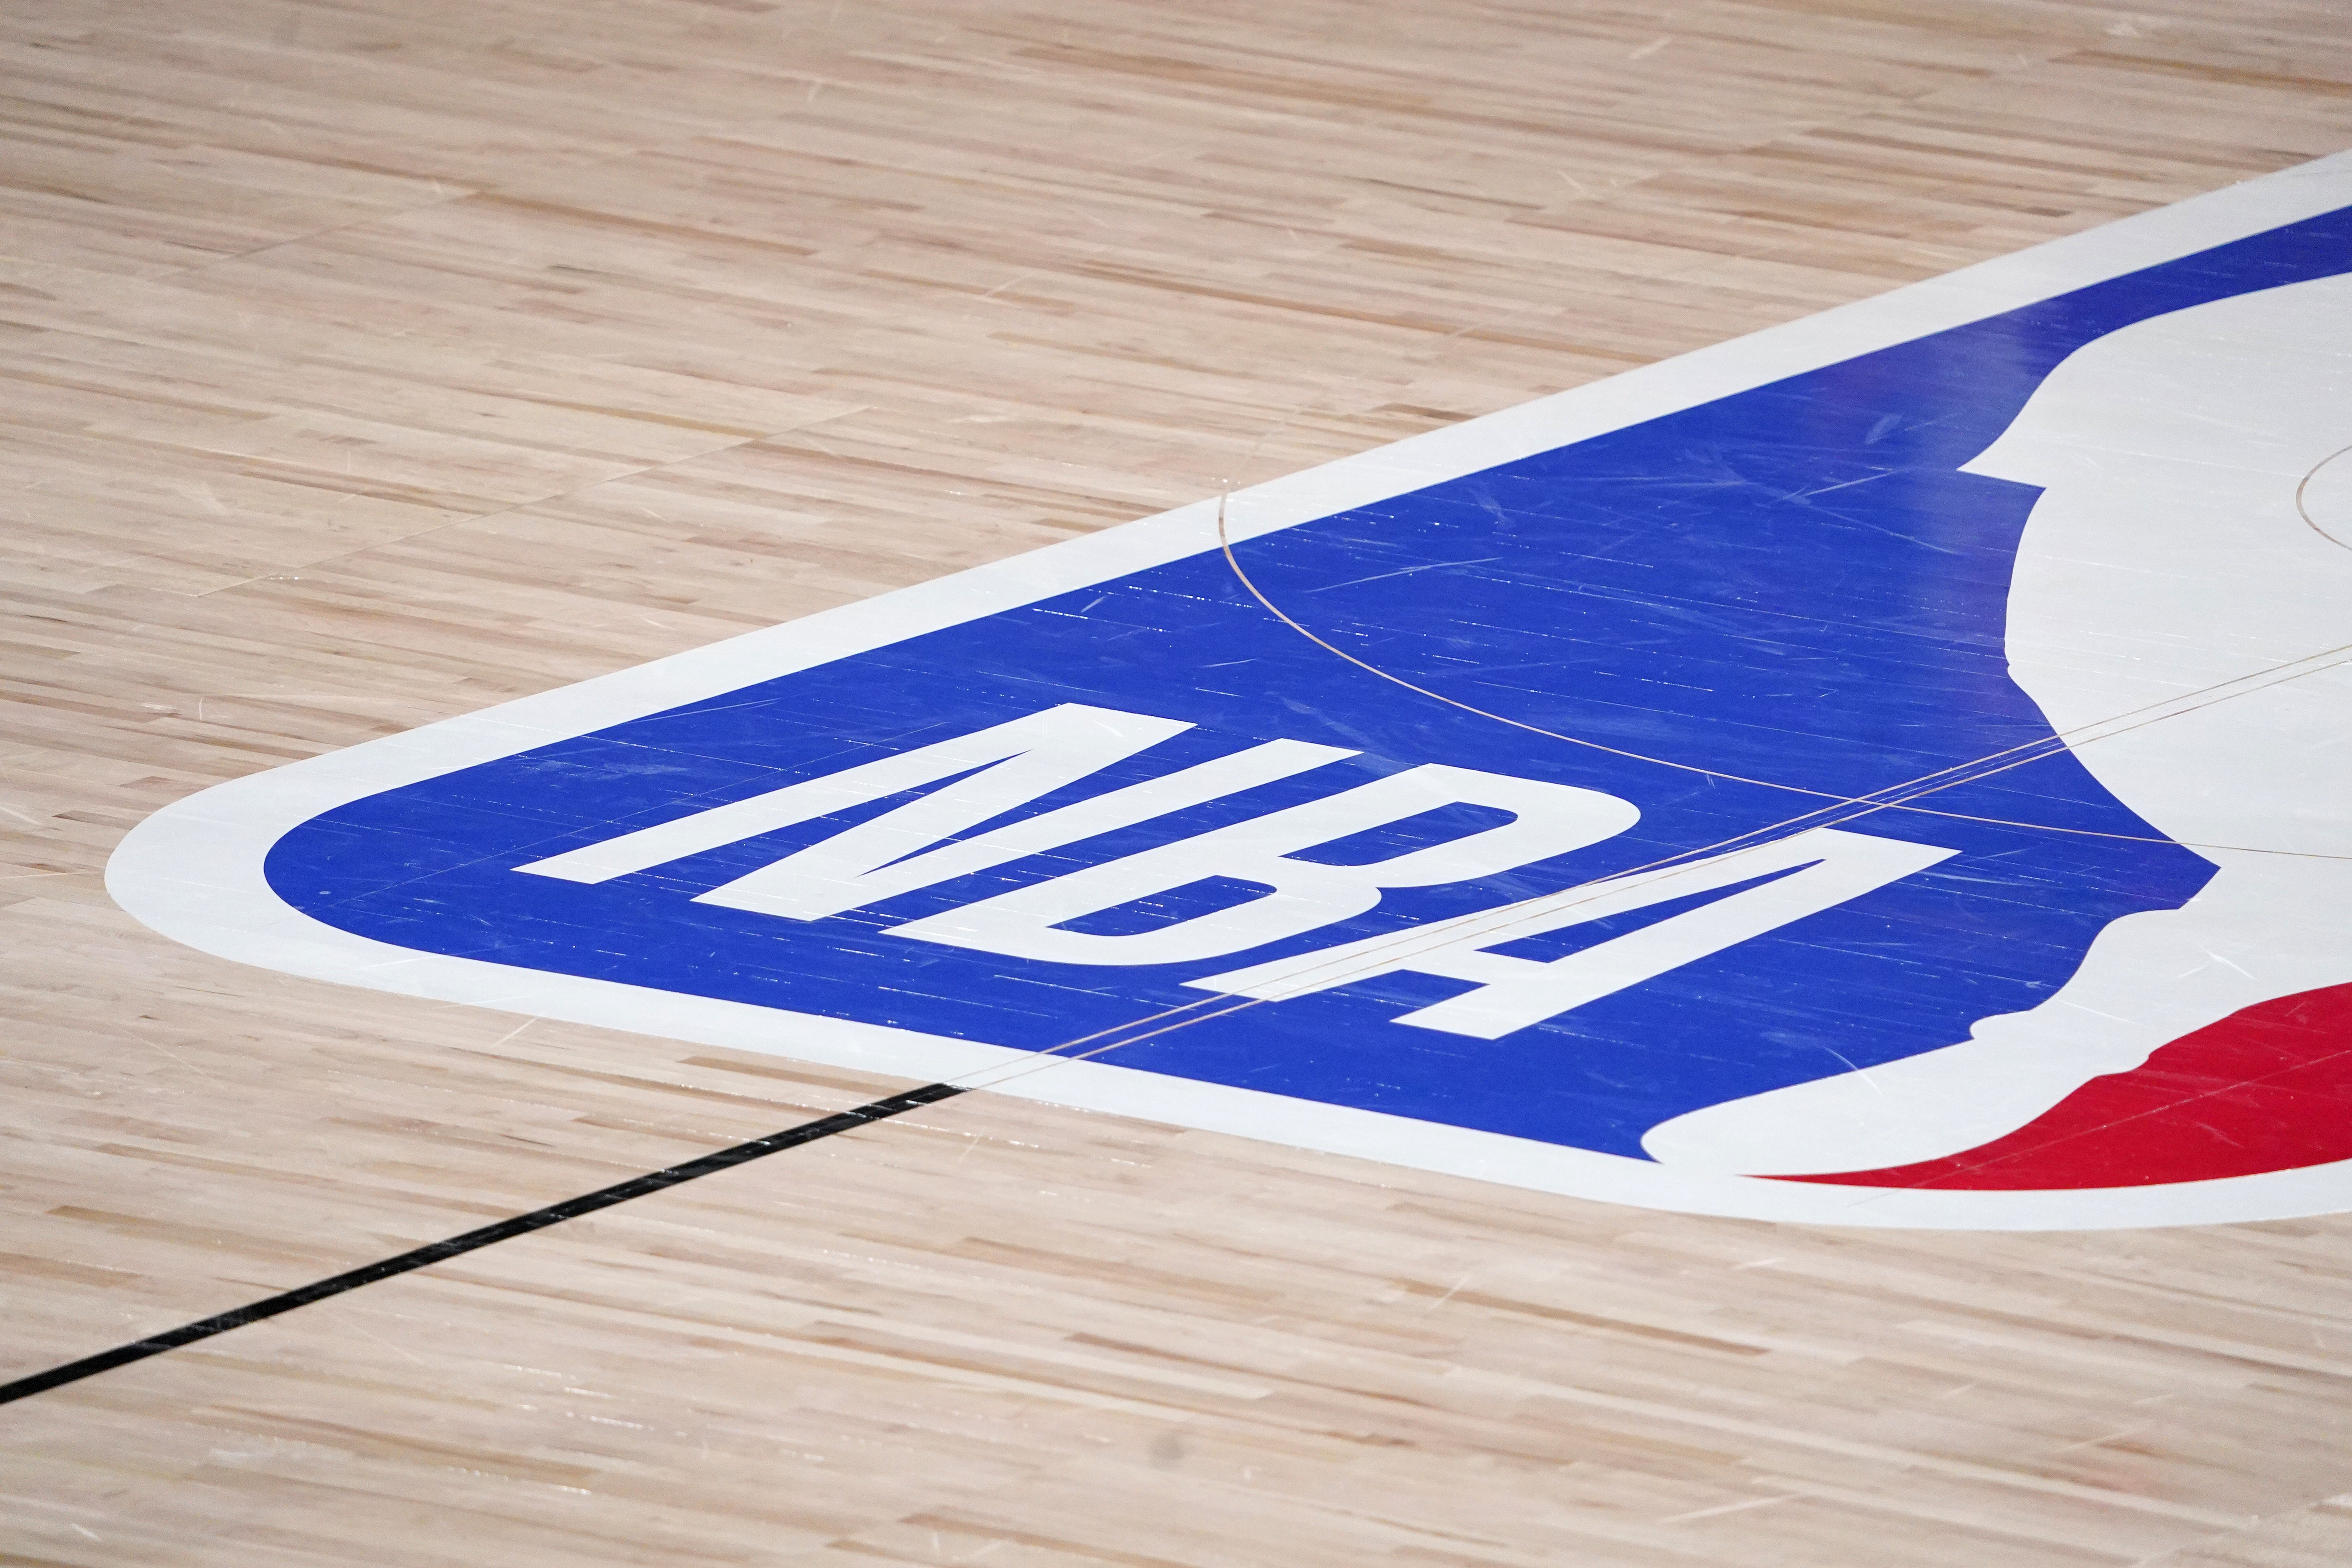 Nba Championship Schedule 2022 Nba Schedule 2022: Regular Season, Playoffs, Finals And Key Dates  Reportedly Revealed | Bleacher Report | Latest News, Videos And Highlights